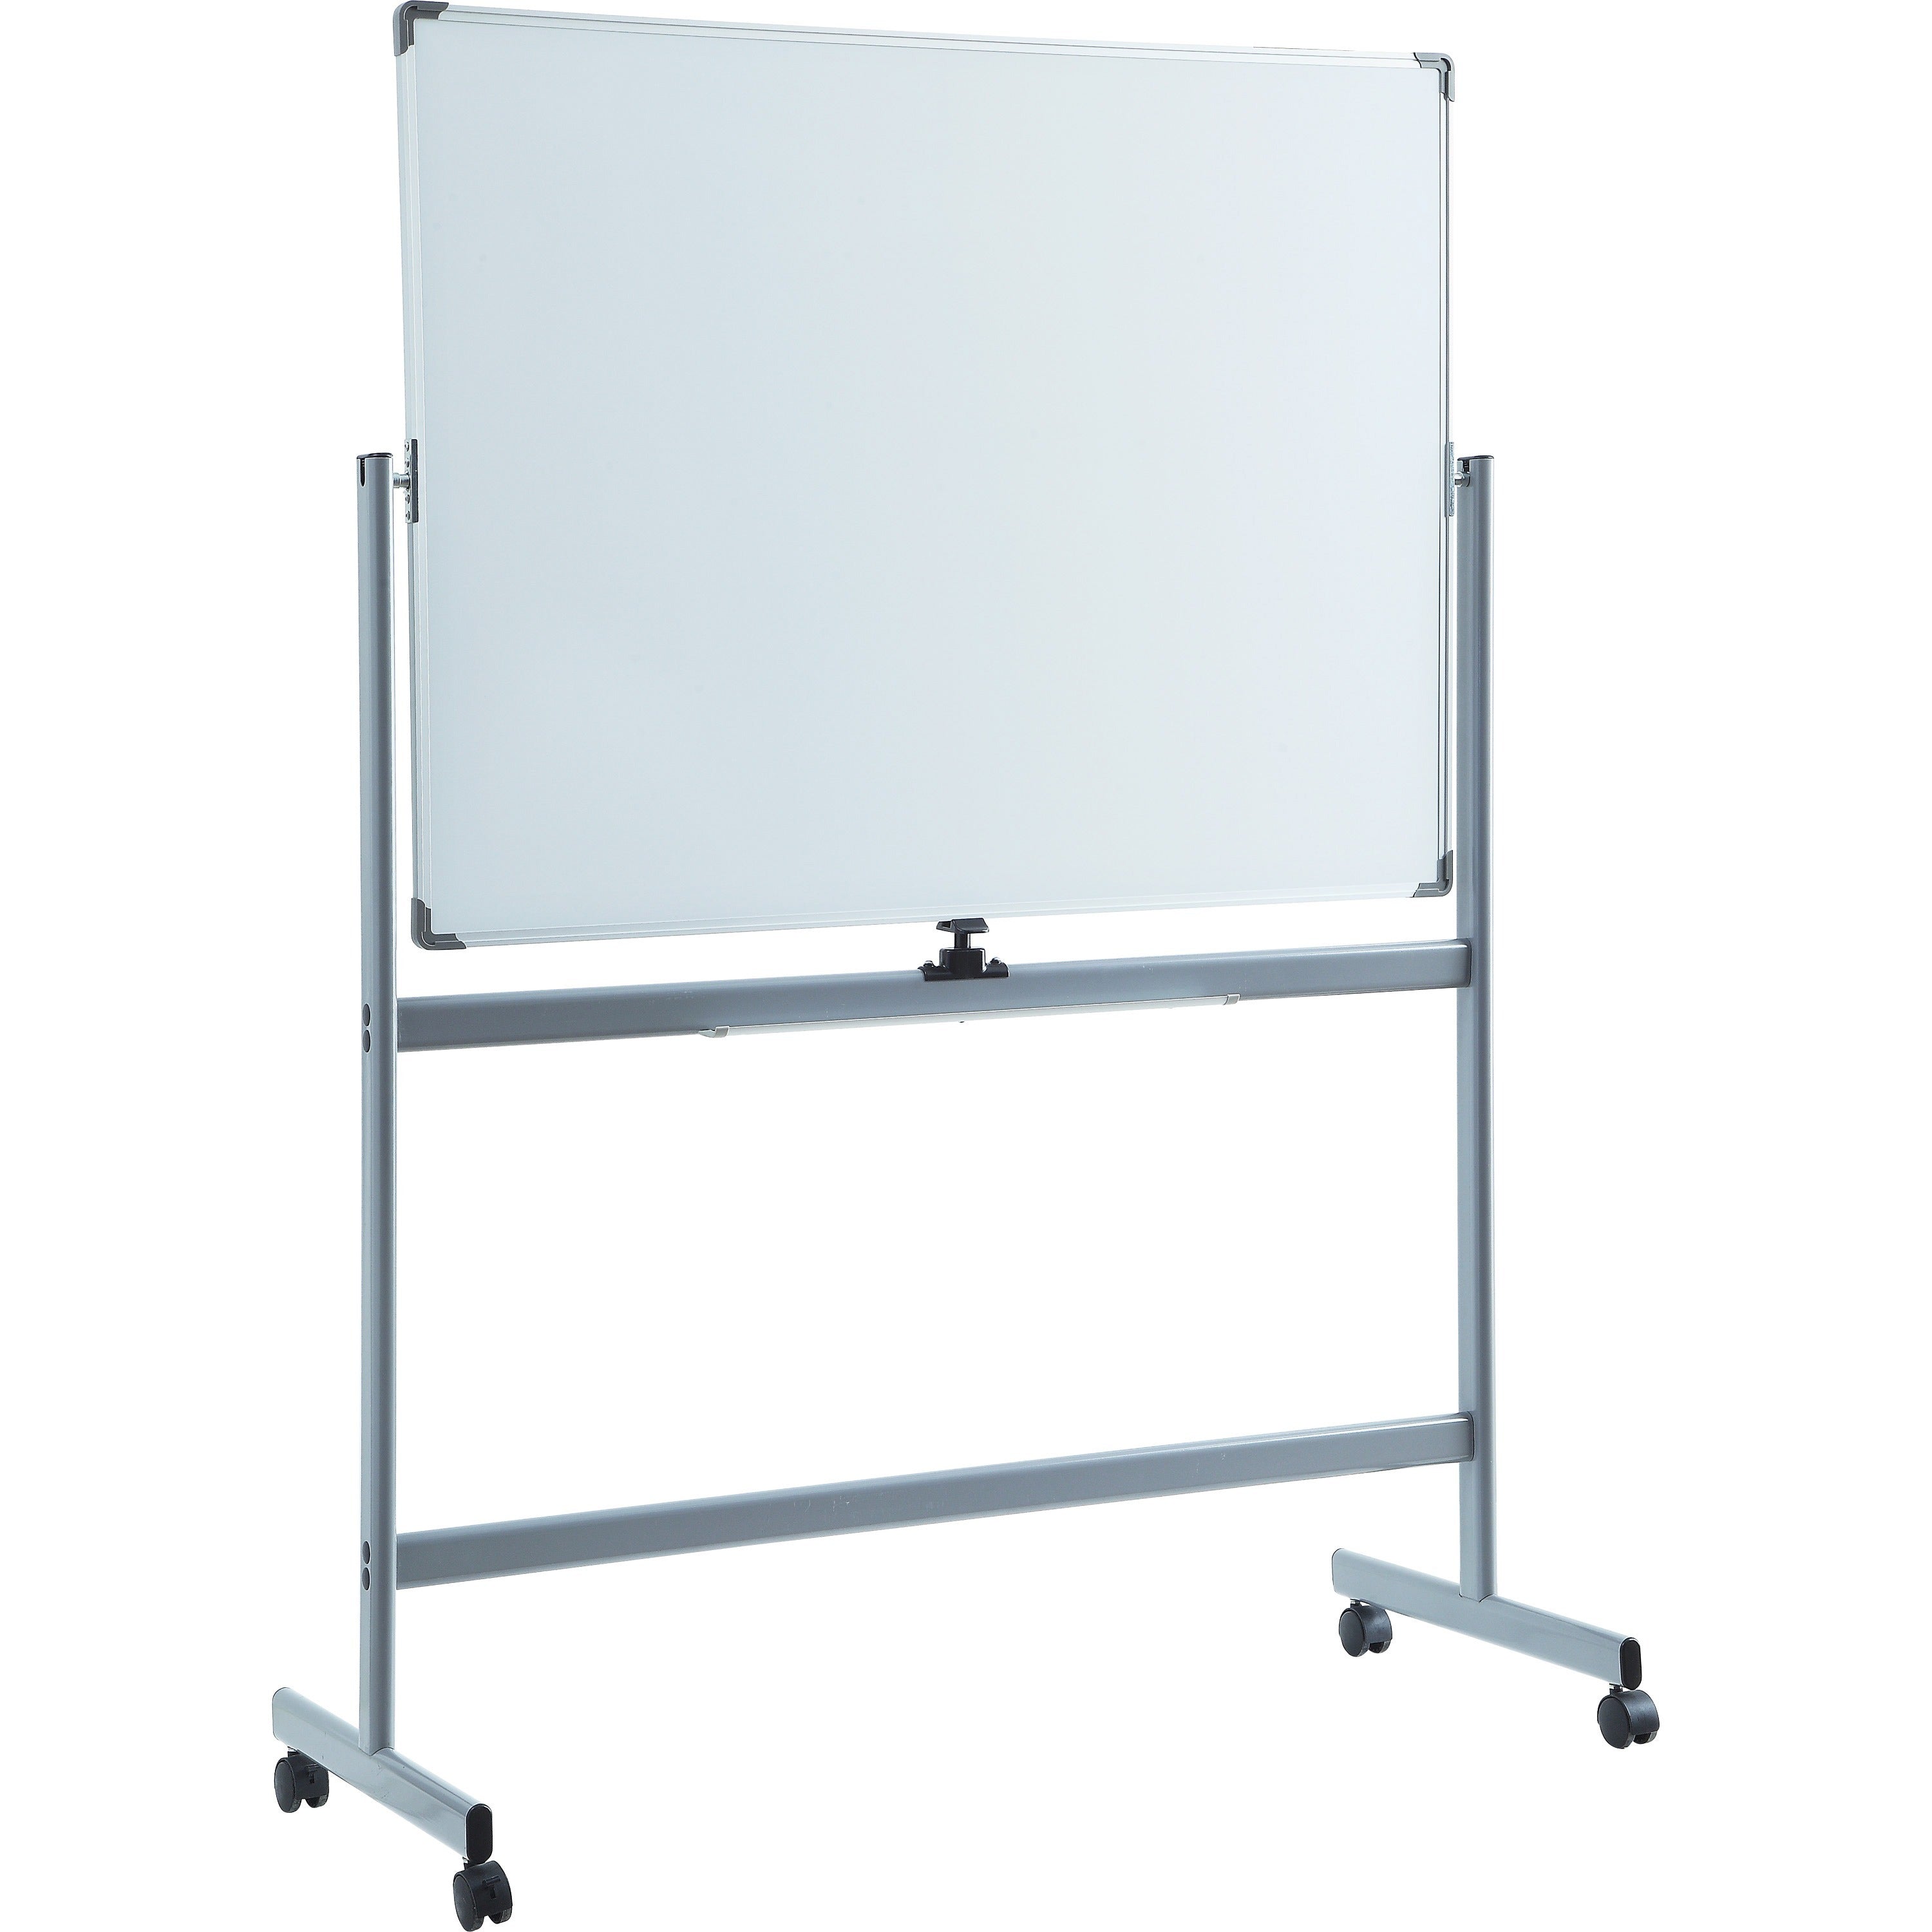 lorell-double-sided-magnetic-whiteboard-easel-72-6-ft-width-x-48-4-ft-height-white-surface-rectangle-floor-standing-magnetic-1-each_llr52569 - 1